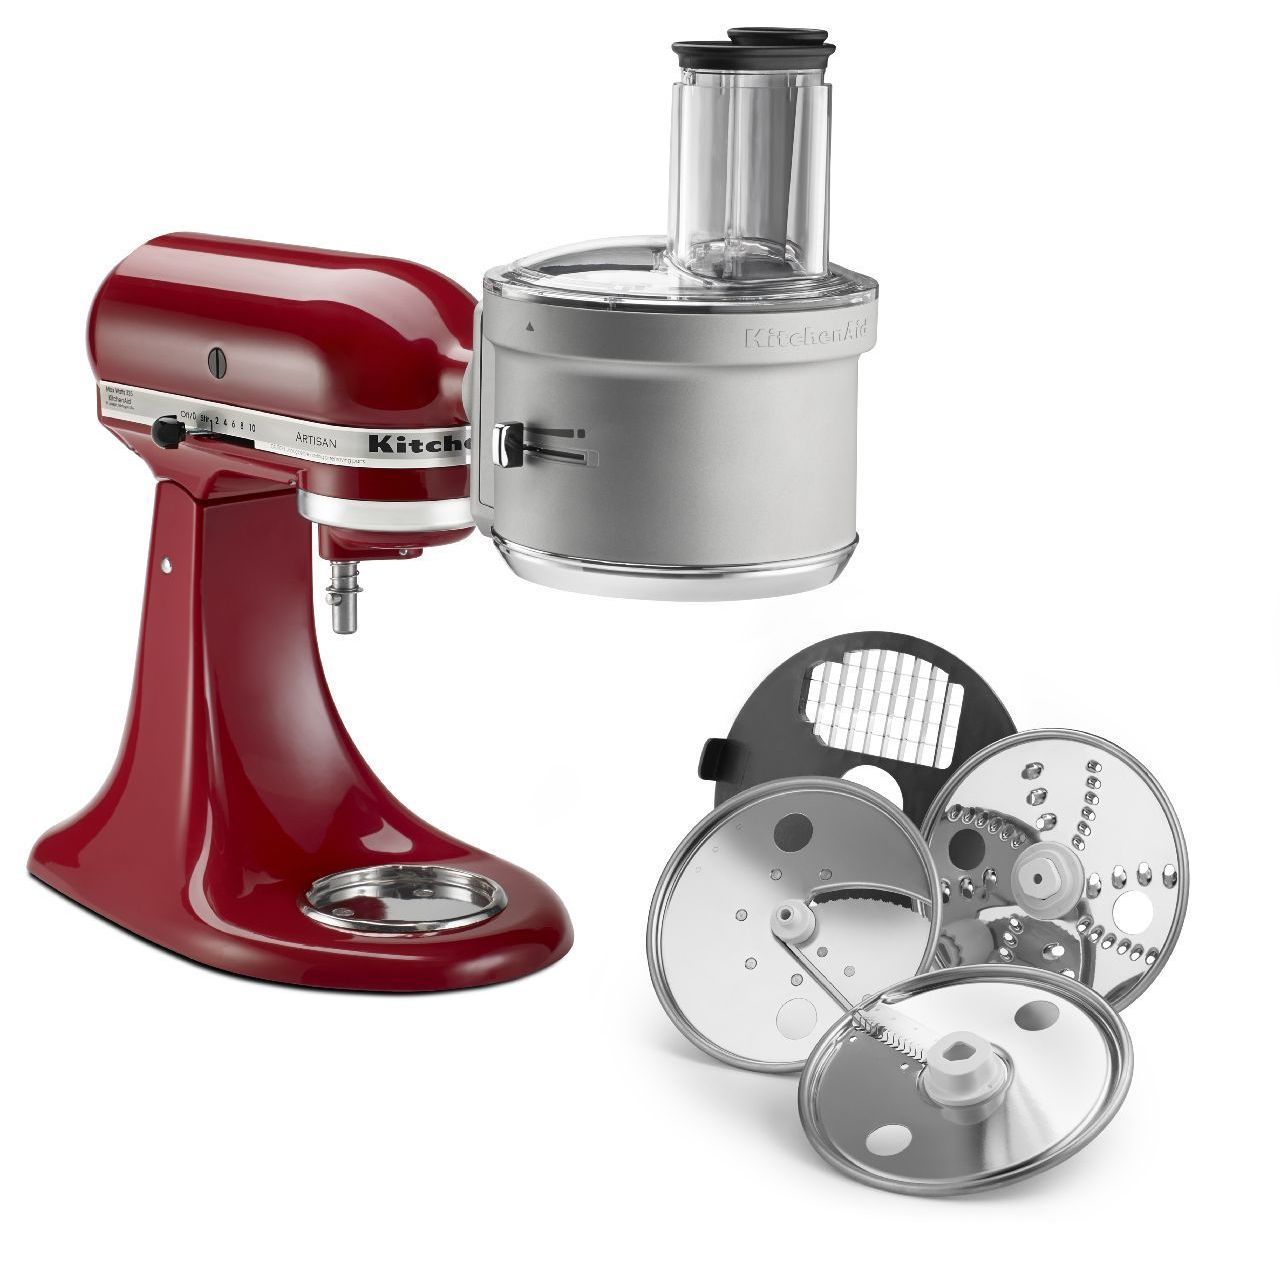 https://ak1.ostkcdn.com/images/products/9319117/KitchenAid-KSM2FPA-Food-Processor-Attachment-with-Commercial-Style-Dicing-Kit-0a4974d2-4c1c-46db-b40a-813481d4ed4b.jpg